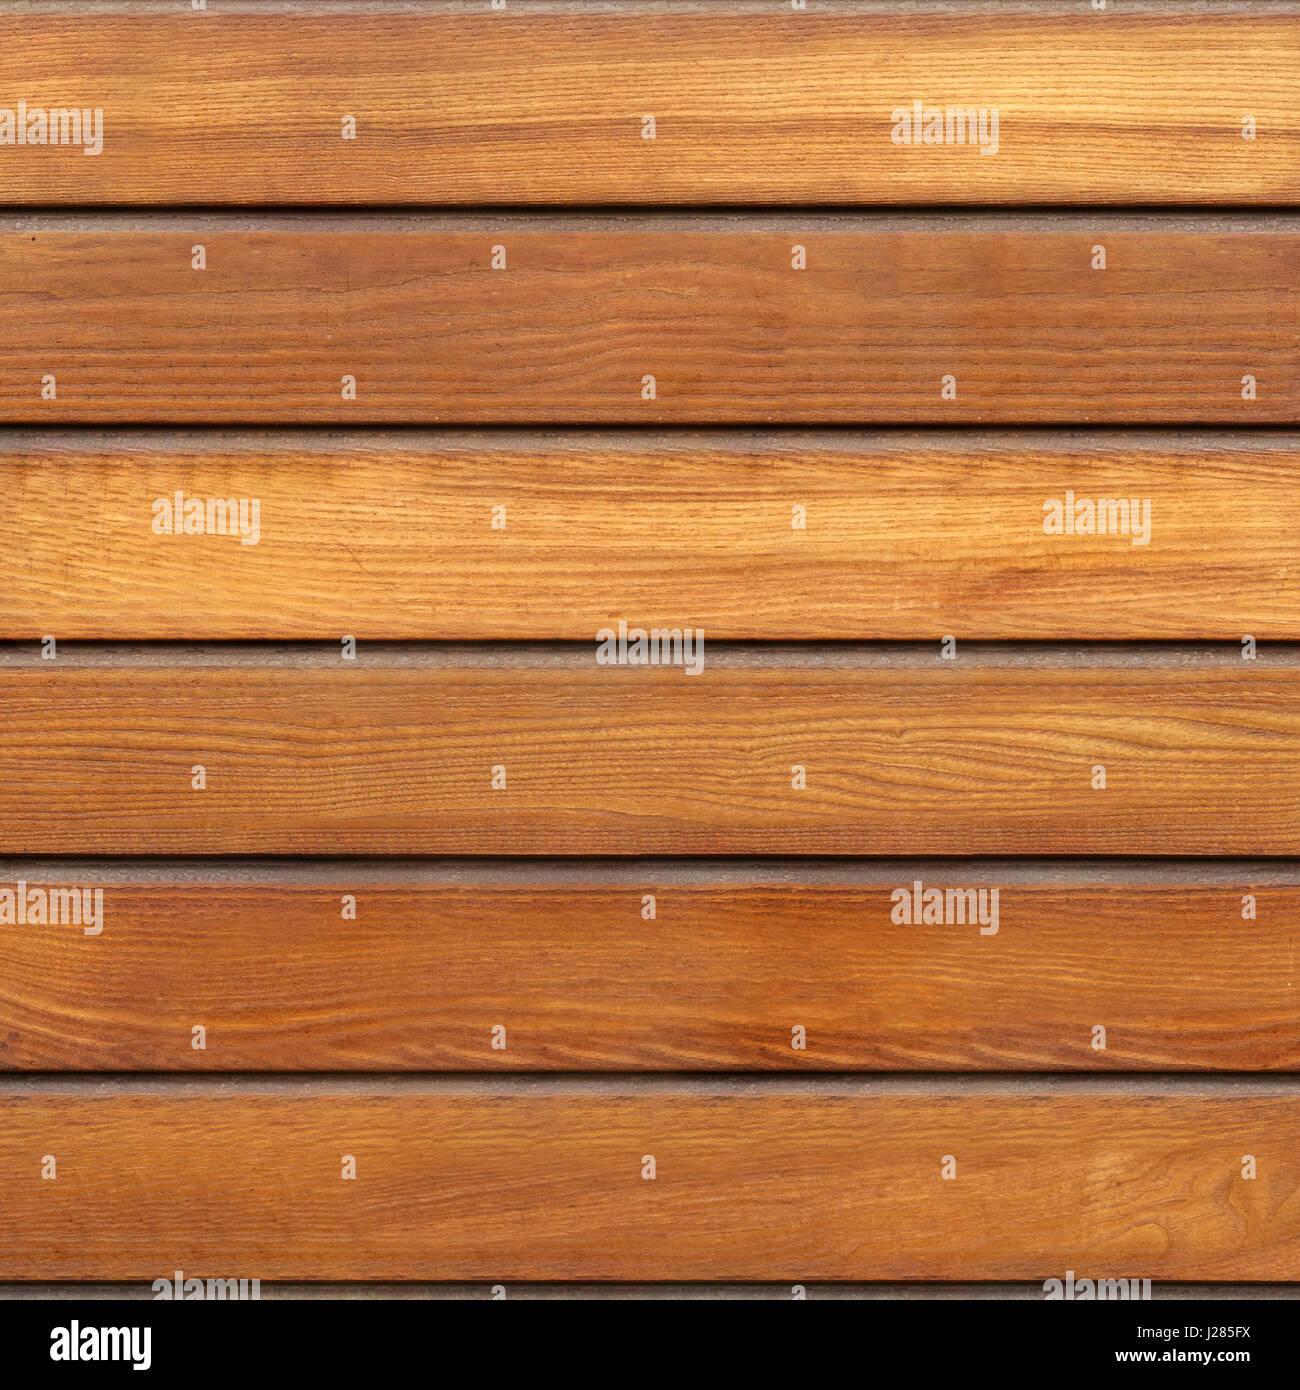 Wooden surface is brown color. Smooth texture. Stock Photo